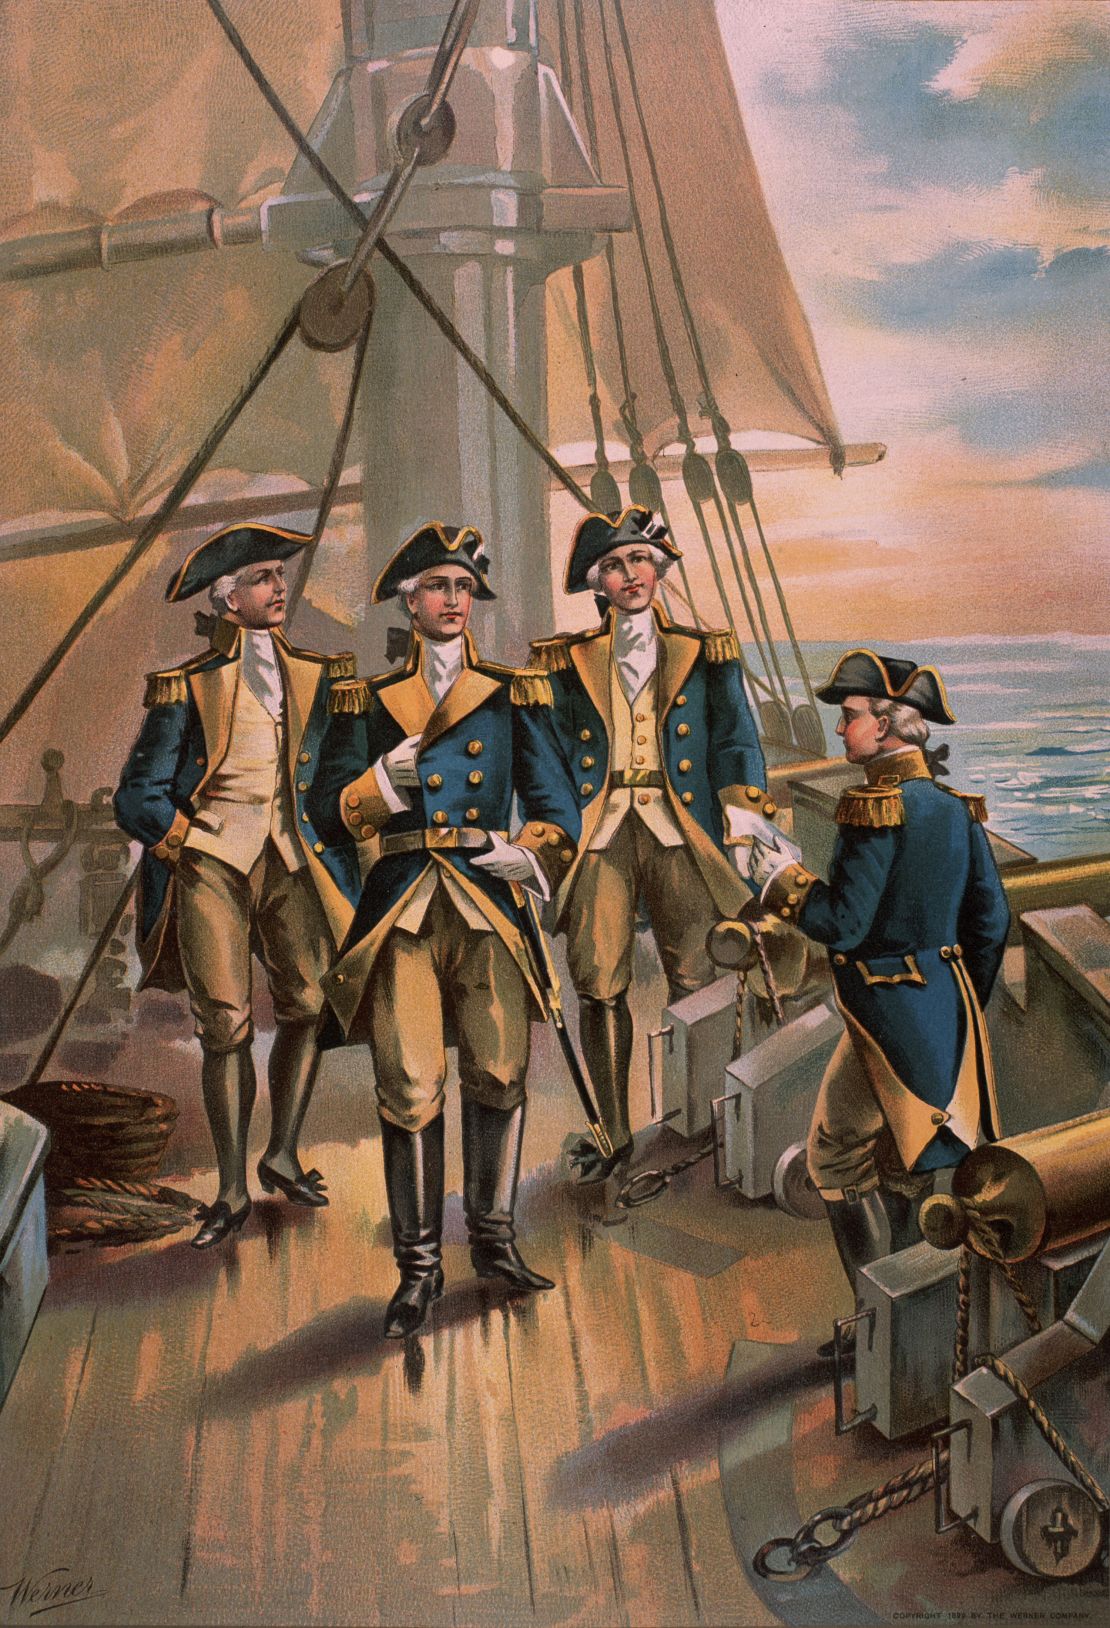 A color illustration published in 1899 depicts the commander in chief of the Continental Navy in 1776, Commodore Esek Hopkins, with his officers.